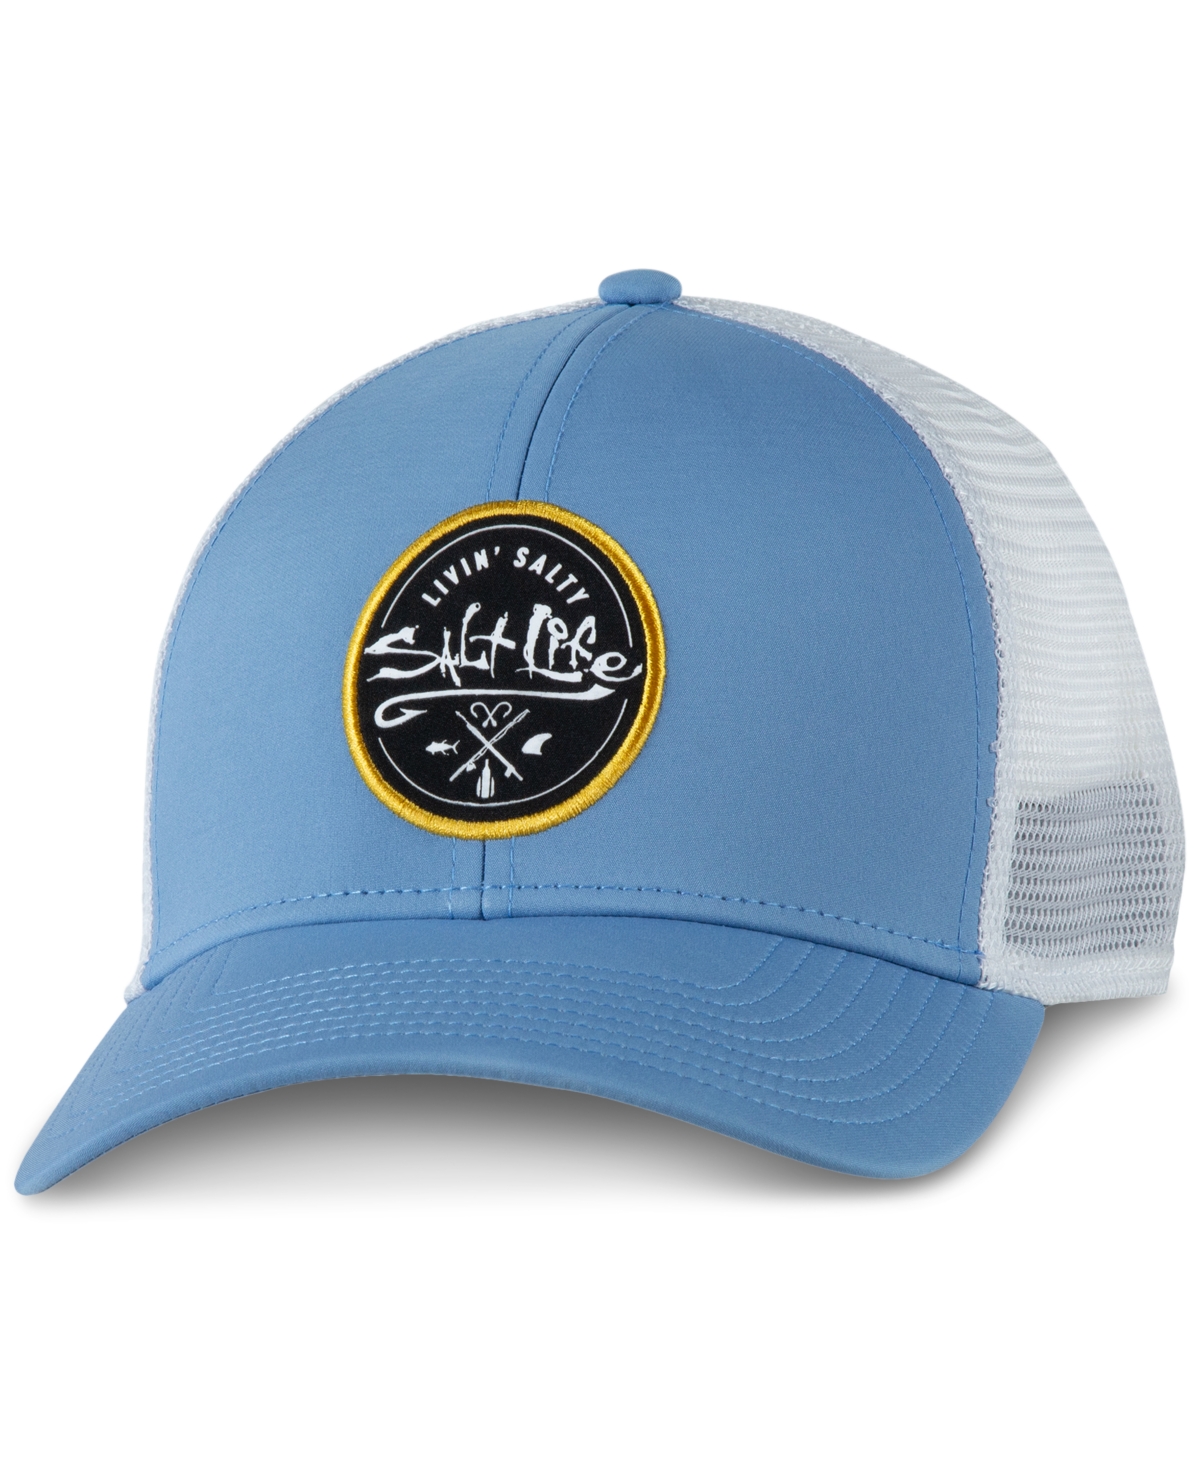 Men's Playin' Hookie Relaxed-Fit Stretch Hat - Steel Blue